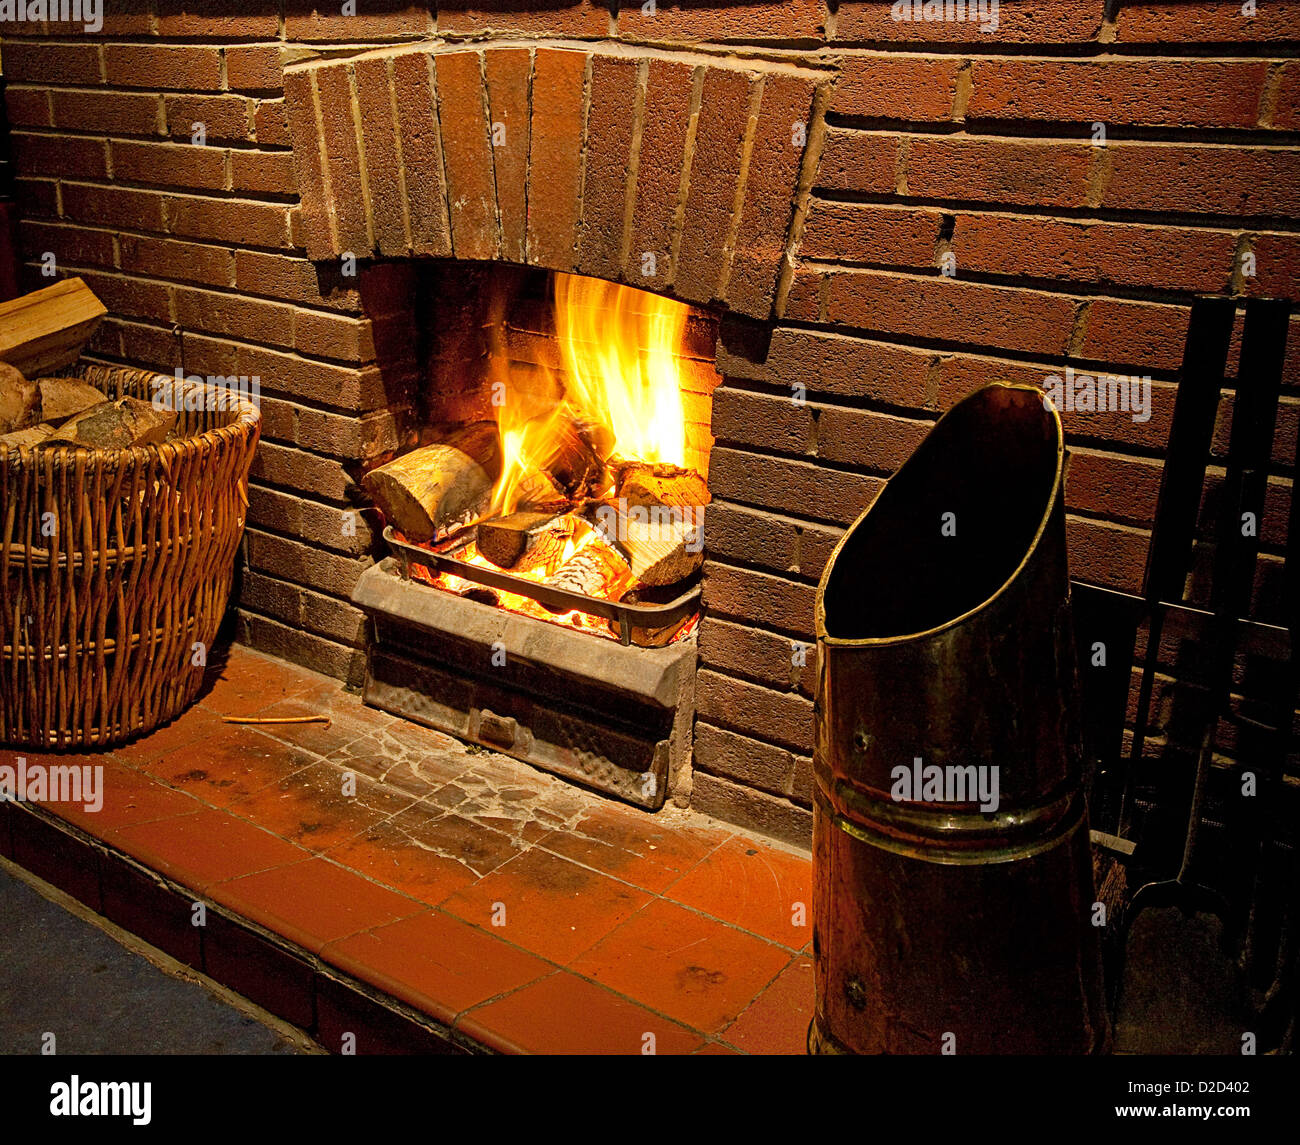 Cosy bright Roaring log fire with brick surround glowing with flames going up chimney Stock Photo